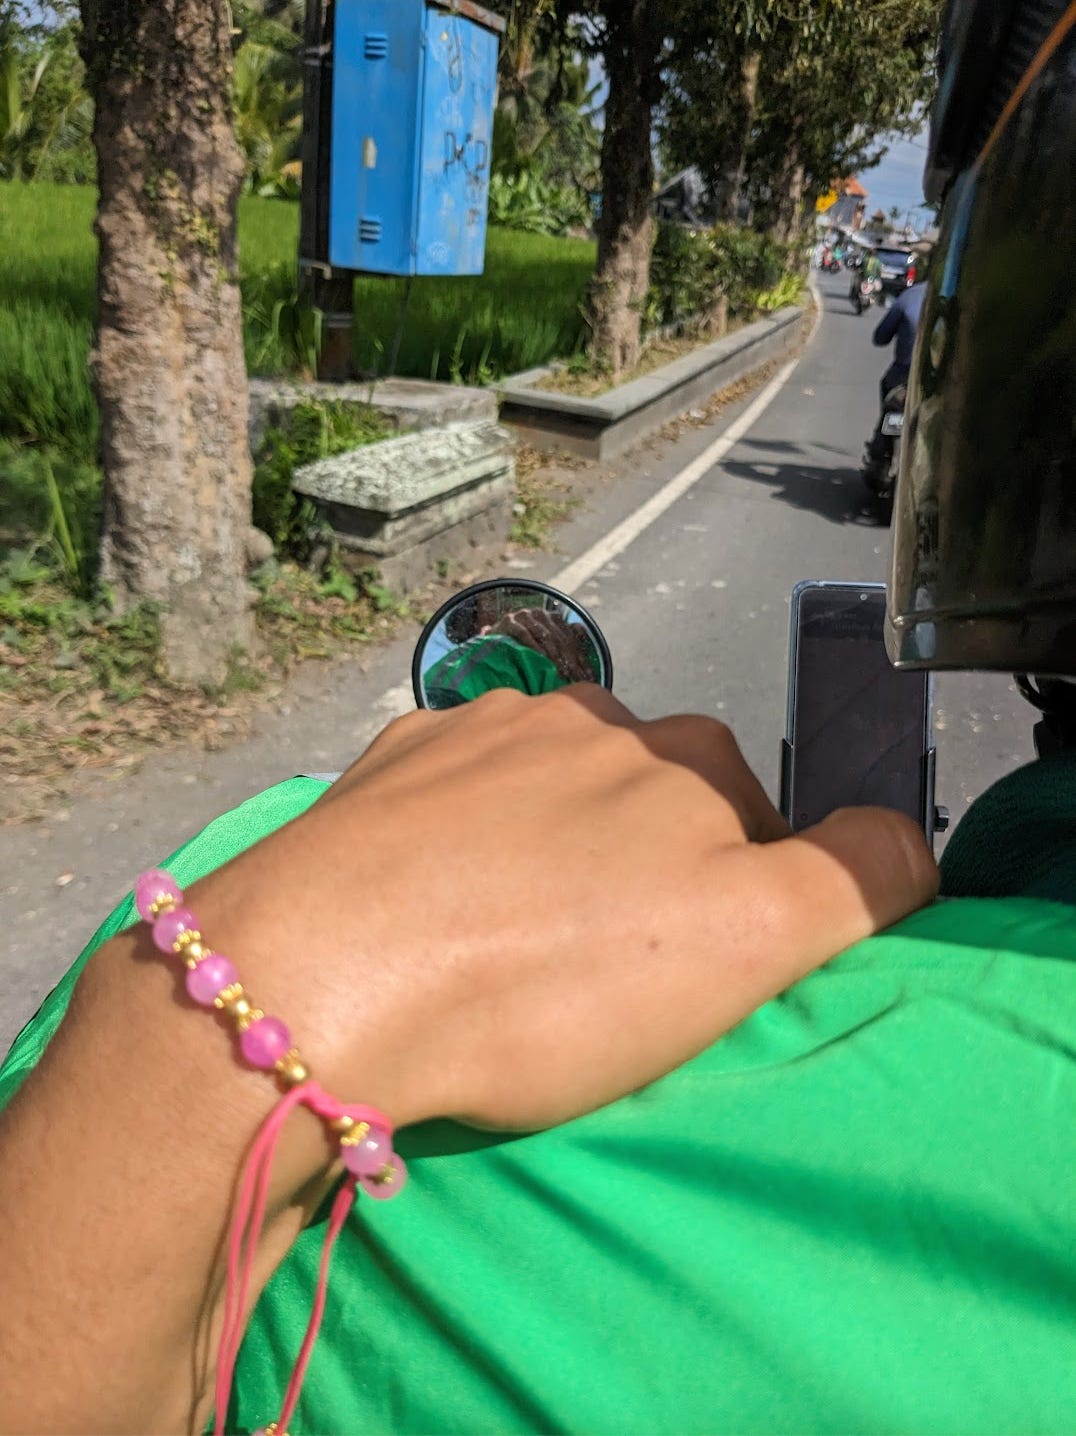 Nathalie holds onto the motorbike driver's shoulder. Her pink and gold bracelet is visible on her wrist. She snaps a photo of herself to show her reflection om the motorbike's rearview mirror